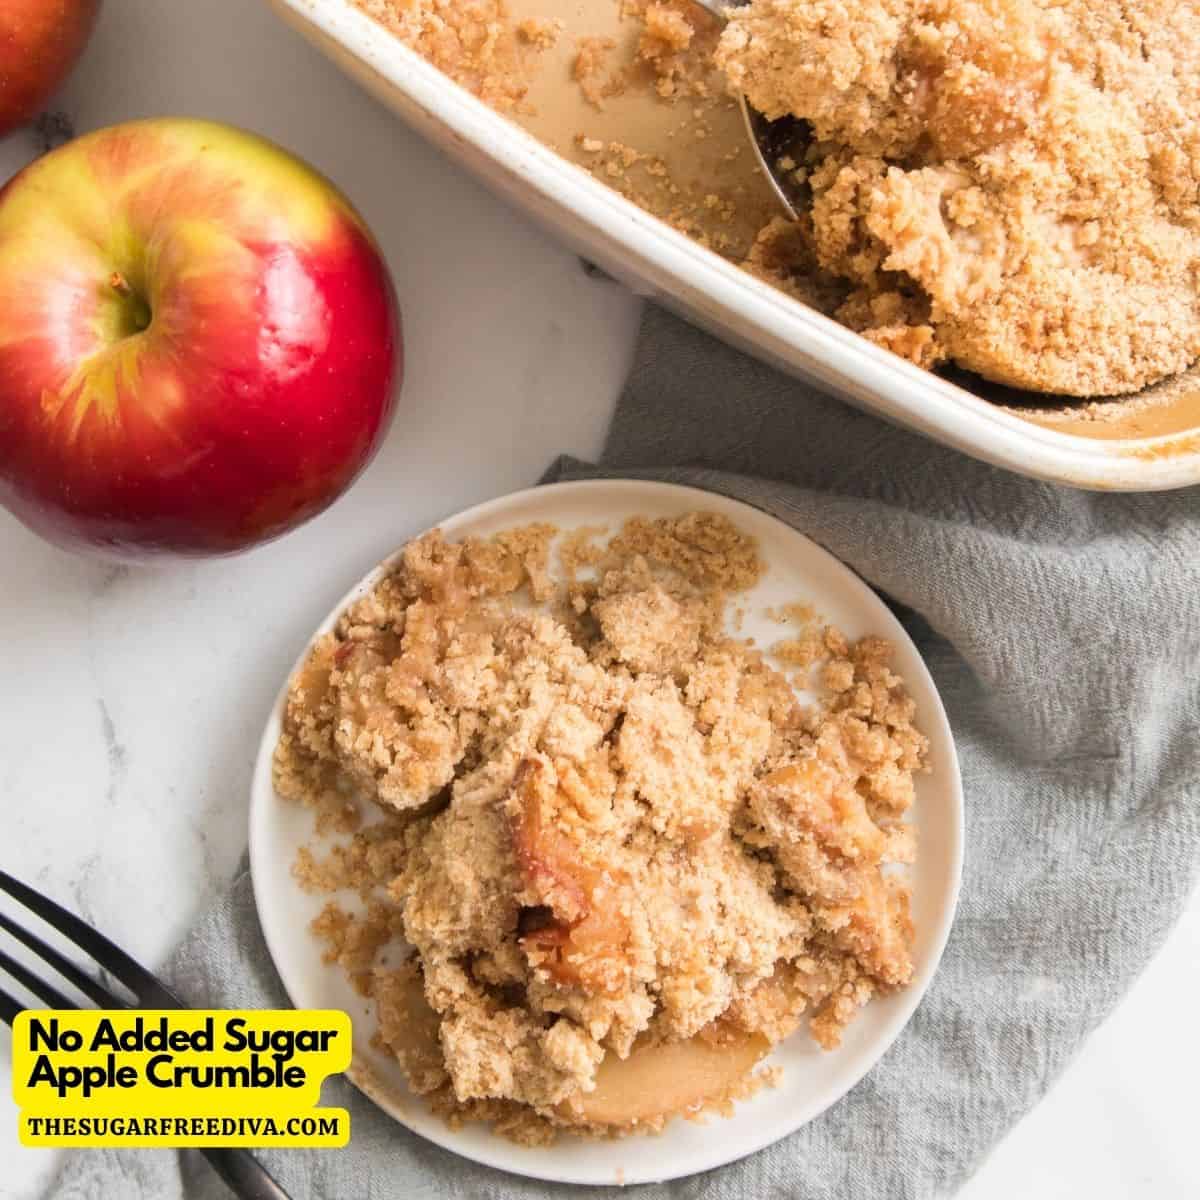 No Added Sugar Apple Crumble, a simple and delicious classic fall dessert recipe made with no added sugar. Includes lower carb and gluten free options.